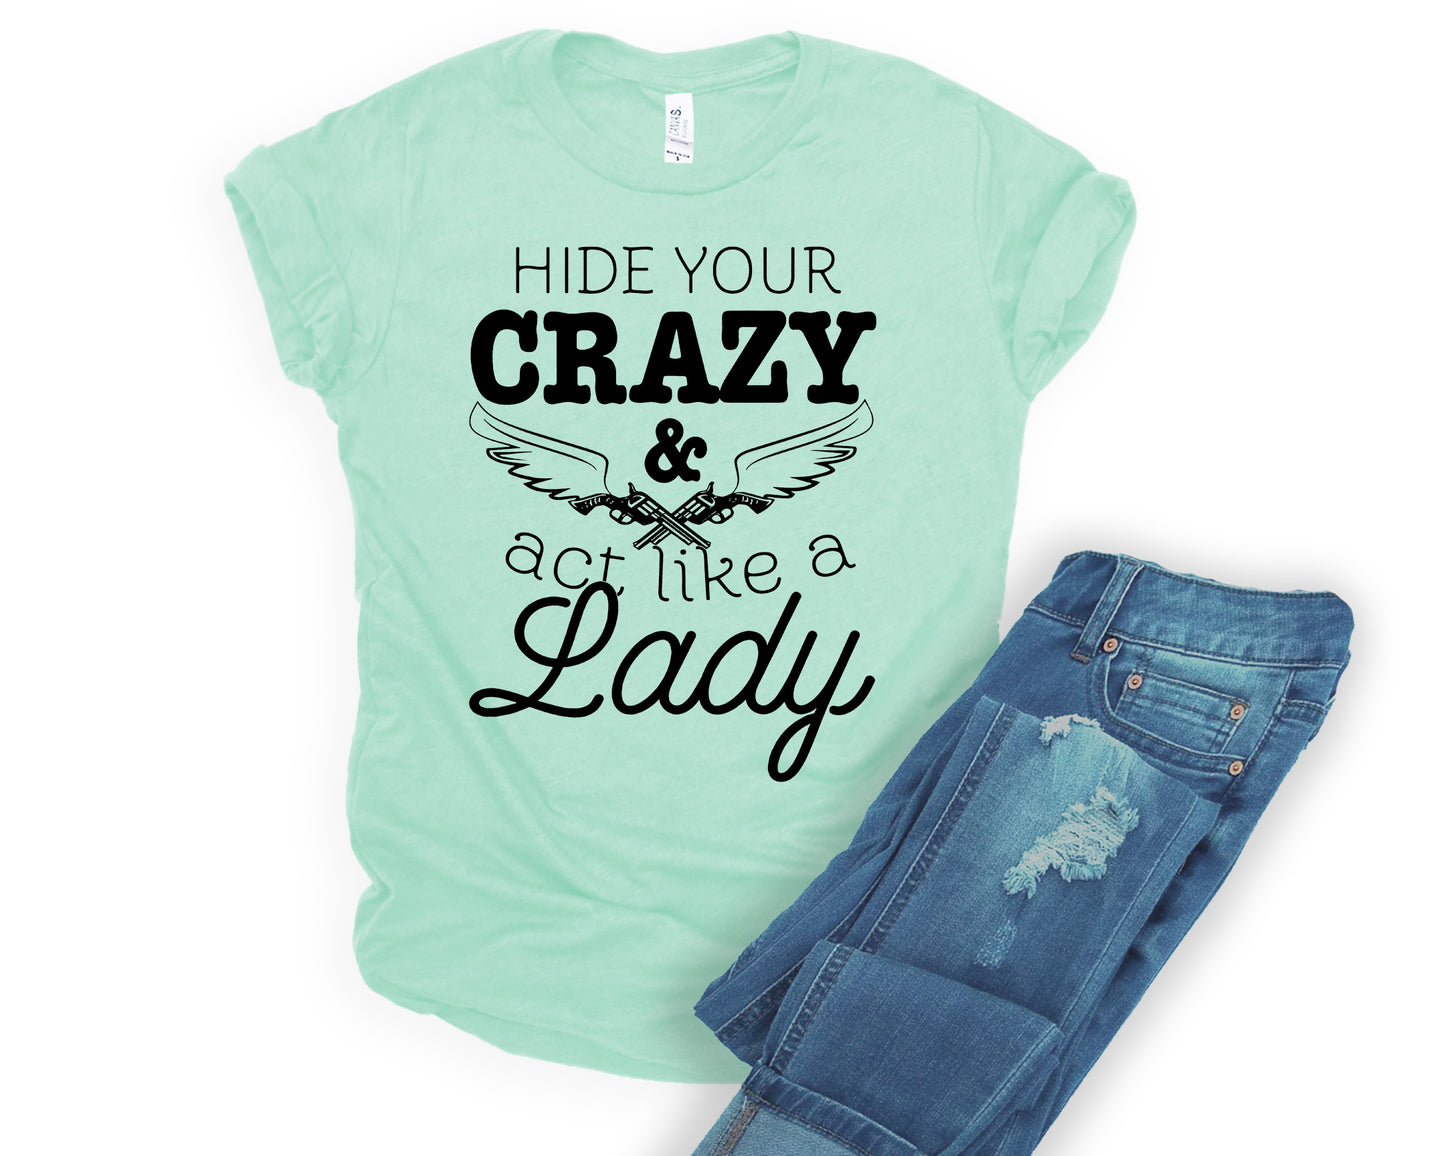 Hide your crazy and act like a lady